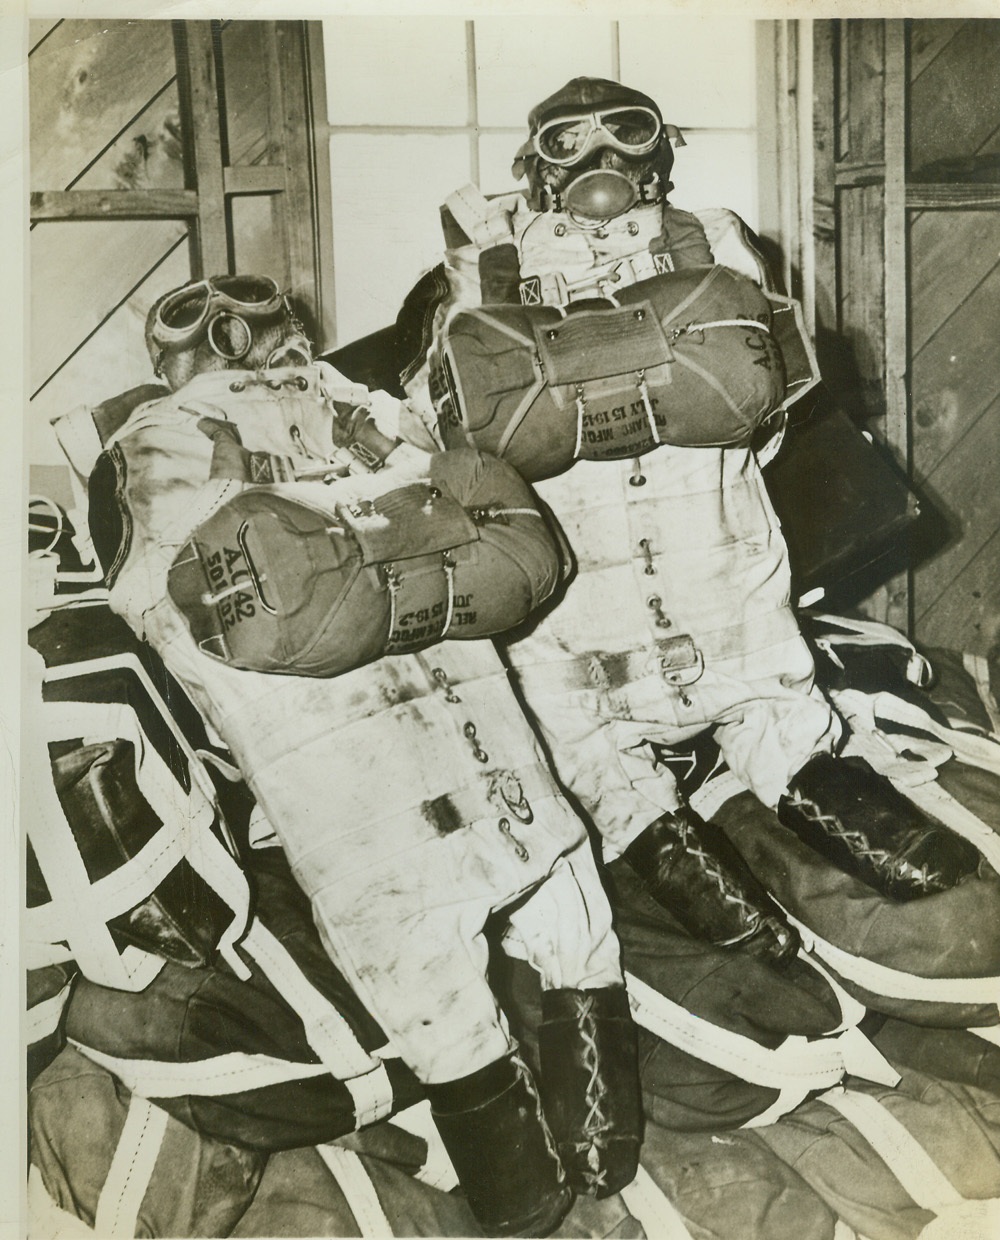 Meet Oscar and Nellie. CALIFORNIA -- Meet Oscar and Nellie, two dummies that serve as reconnaissance agents for paratroopers now on maneuvers "Somewhere in the California Desert." The dummies are dropped first, then if the air is smooth enough, paratroopers follow. Credit: (U.S. Signal Corps from ACME);